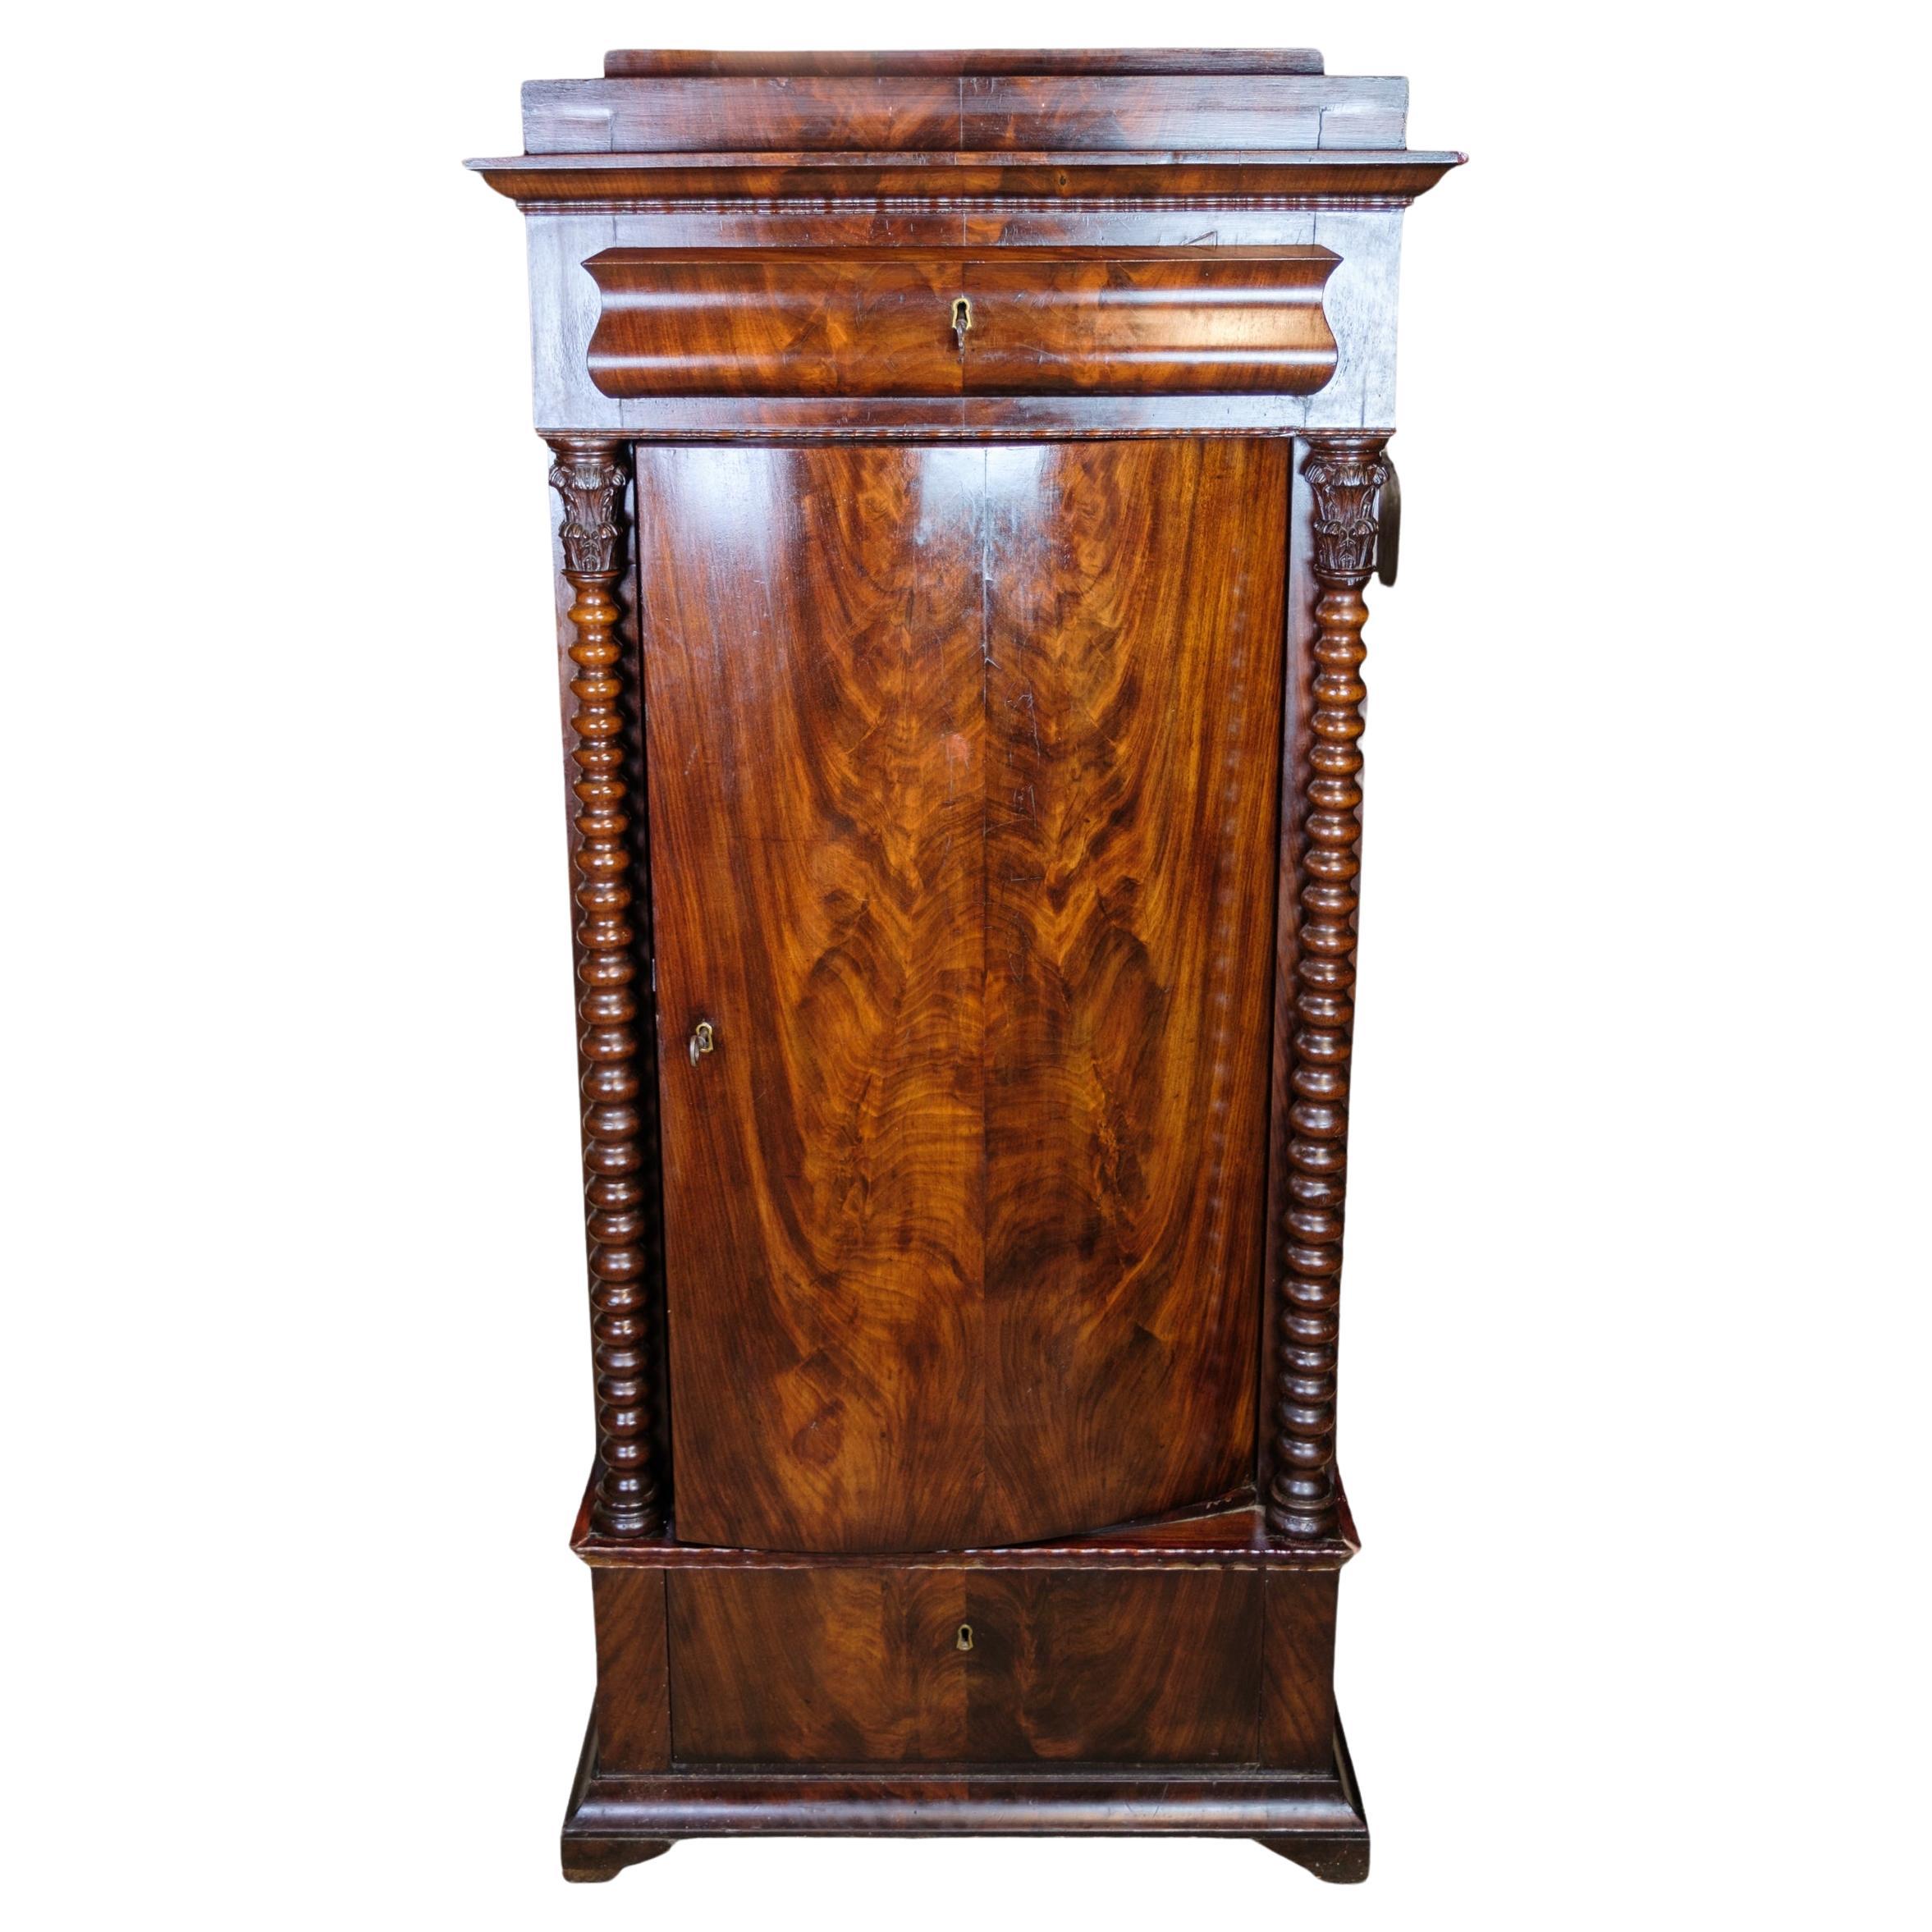 Pedestal cabinet in Mahogany Late Empire perid from the 1840s